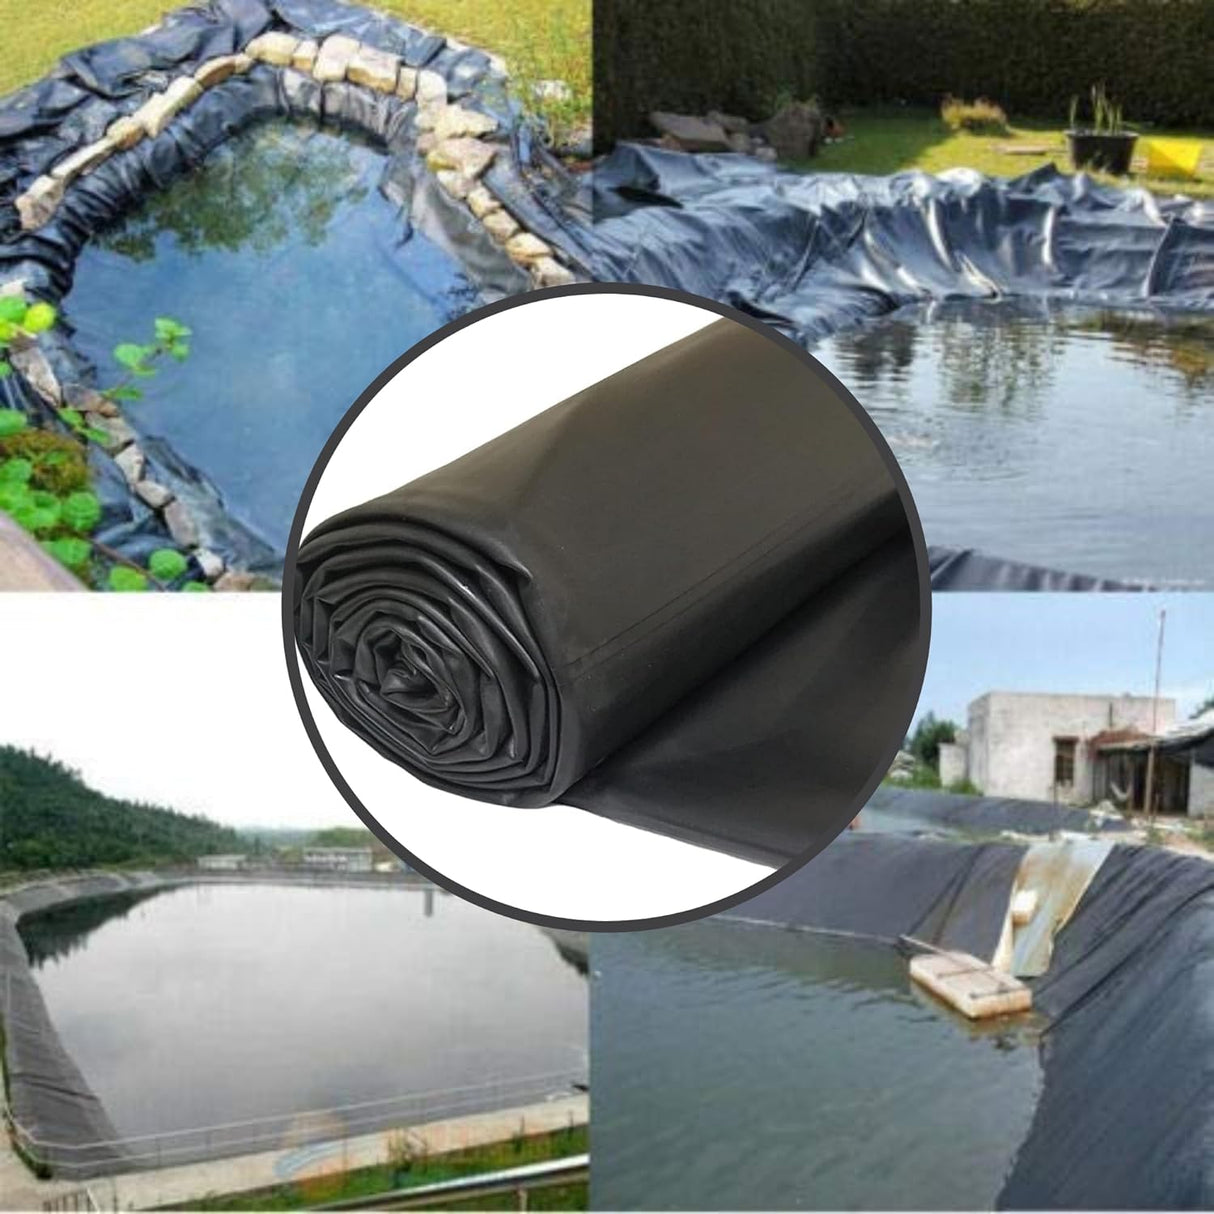 Singhal 500 Micron HDPE Pond Liner Sheet Geomembrane Sheet 2.20ft x 20ft, Heavy Duty Small Garden Backyard Waterfall Lilly Ponds Lining Fabric (Black)